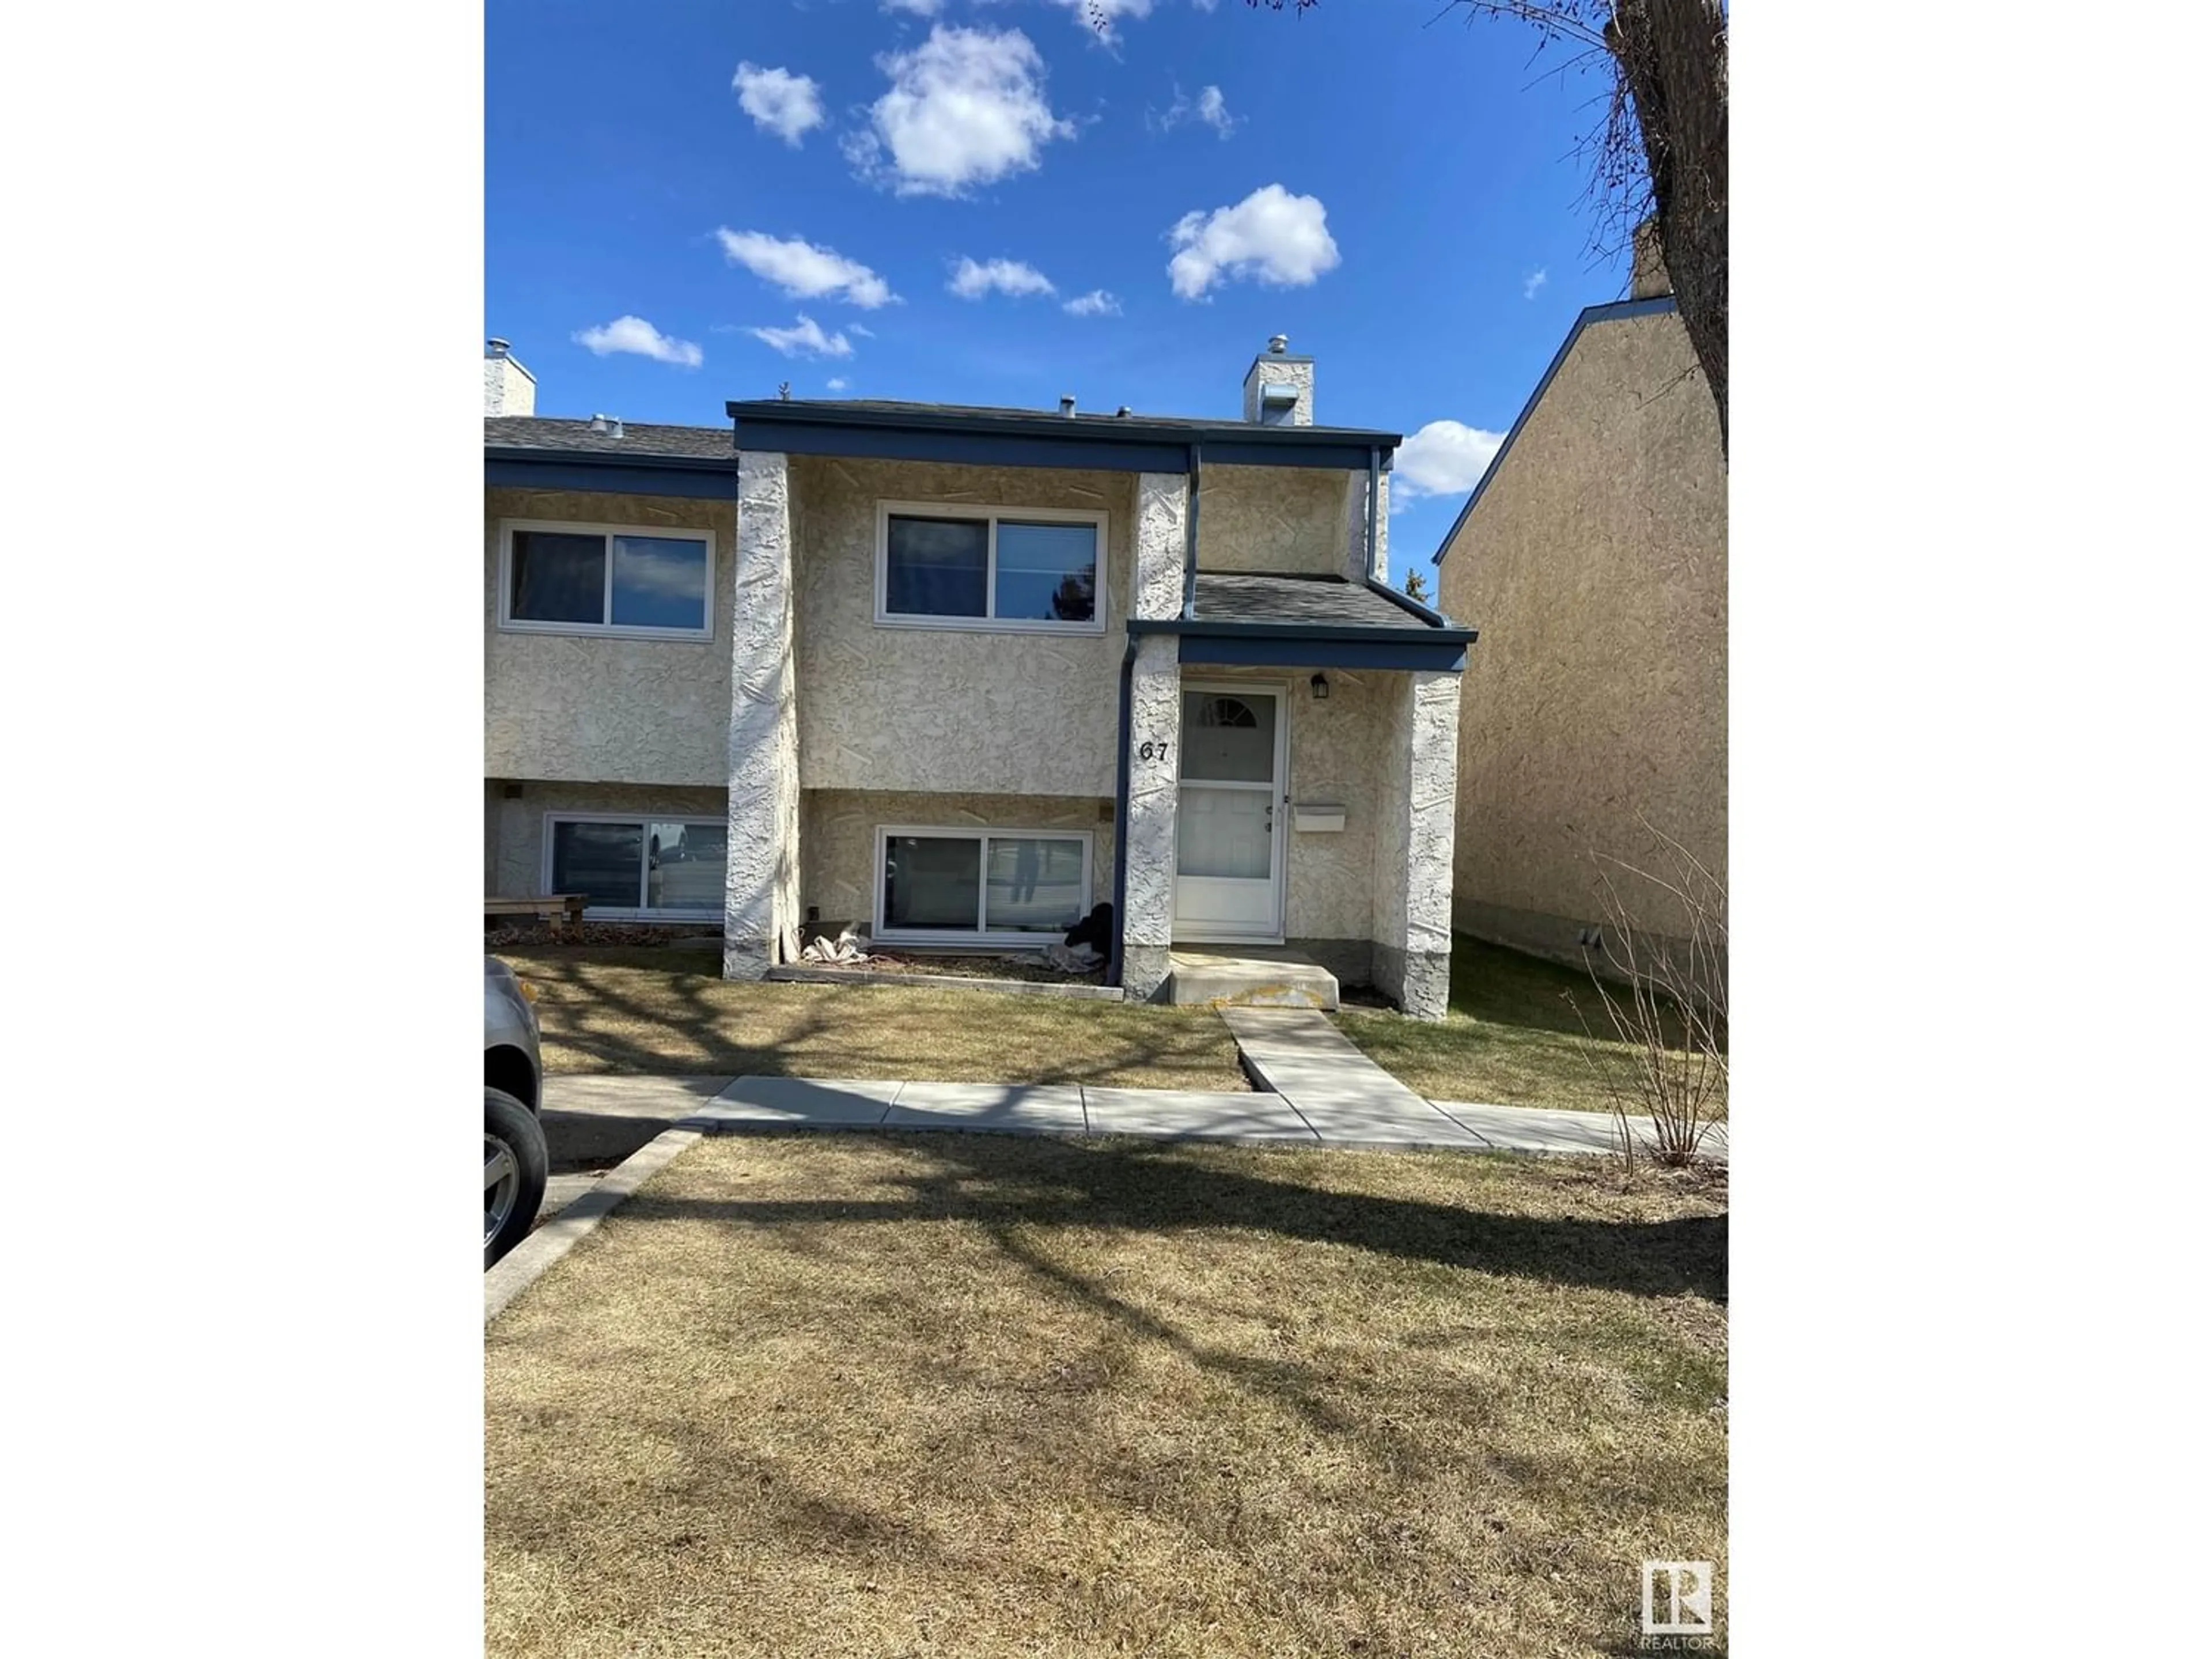 A pic from exterior of the house or condo for #67 6220 172 ST NW, Edmonton Alberta T5T3R4